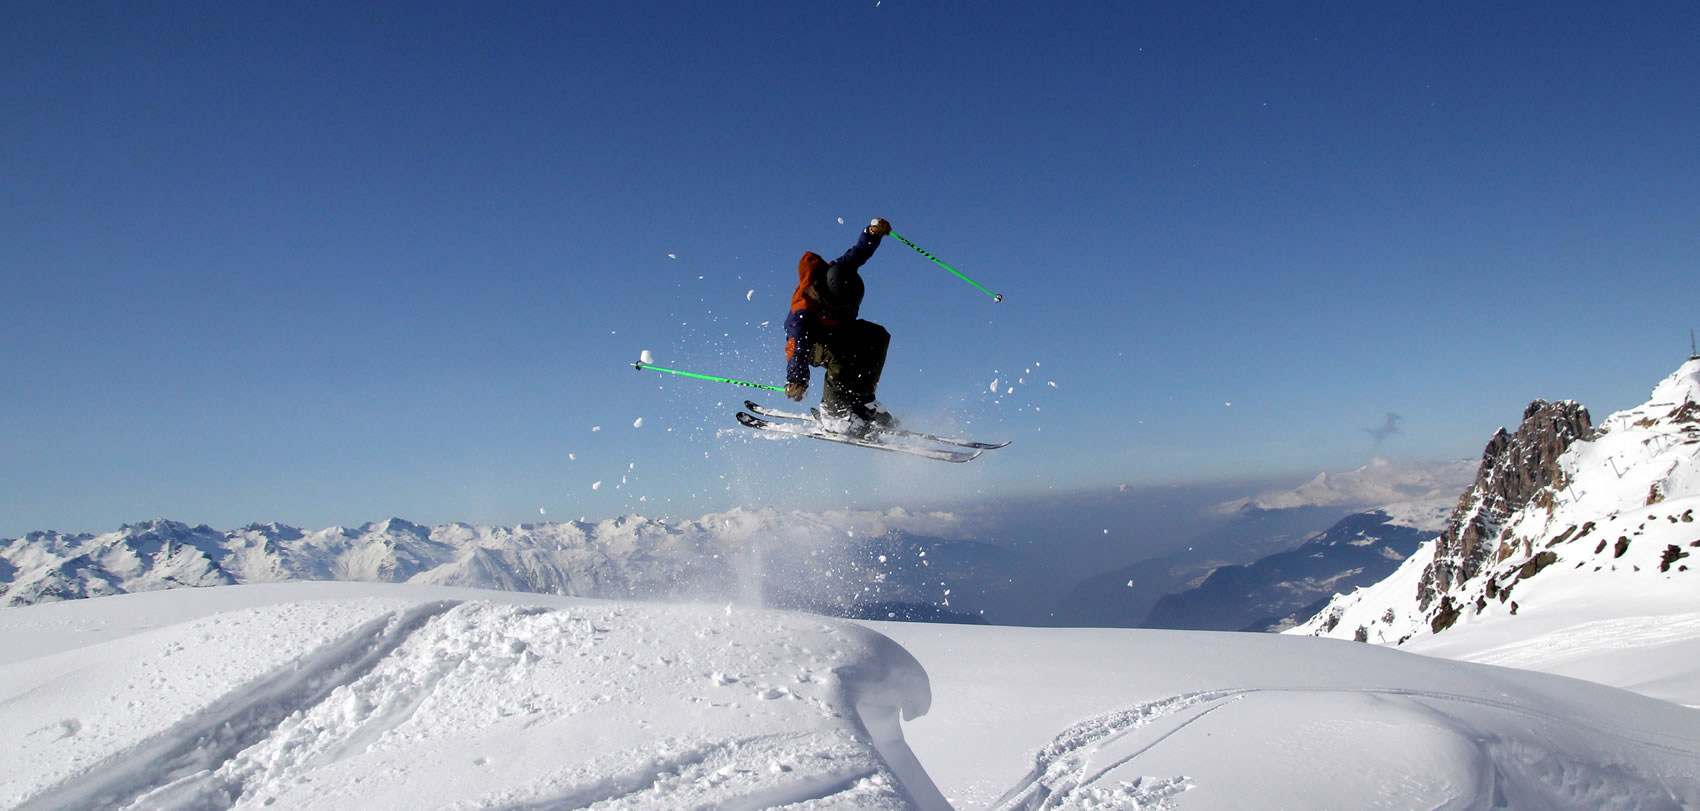 The adventure seeker - becoming a snowboard, ski and surfing instructor - image courtesy of the Ticket to Ride Group